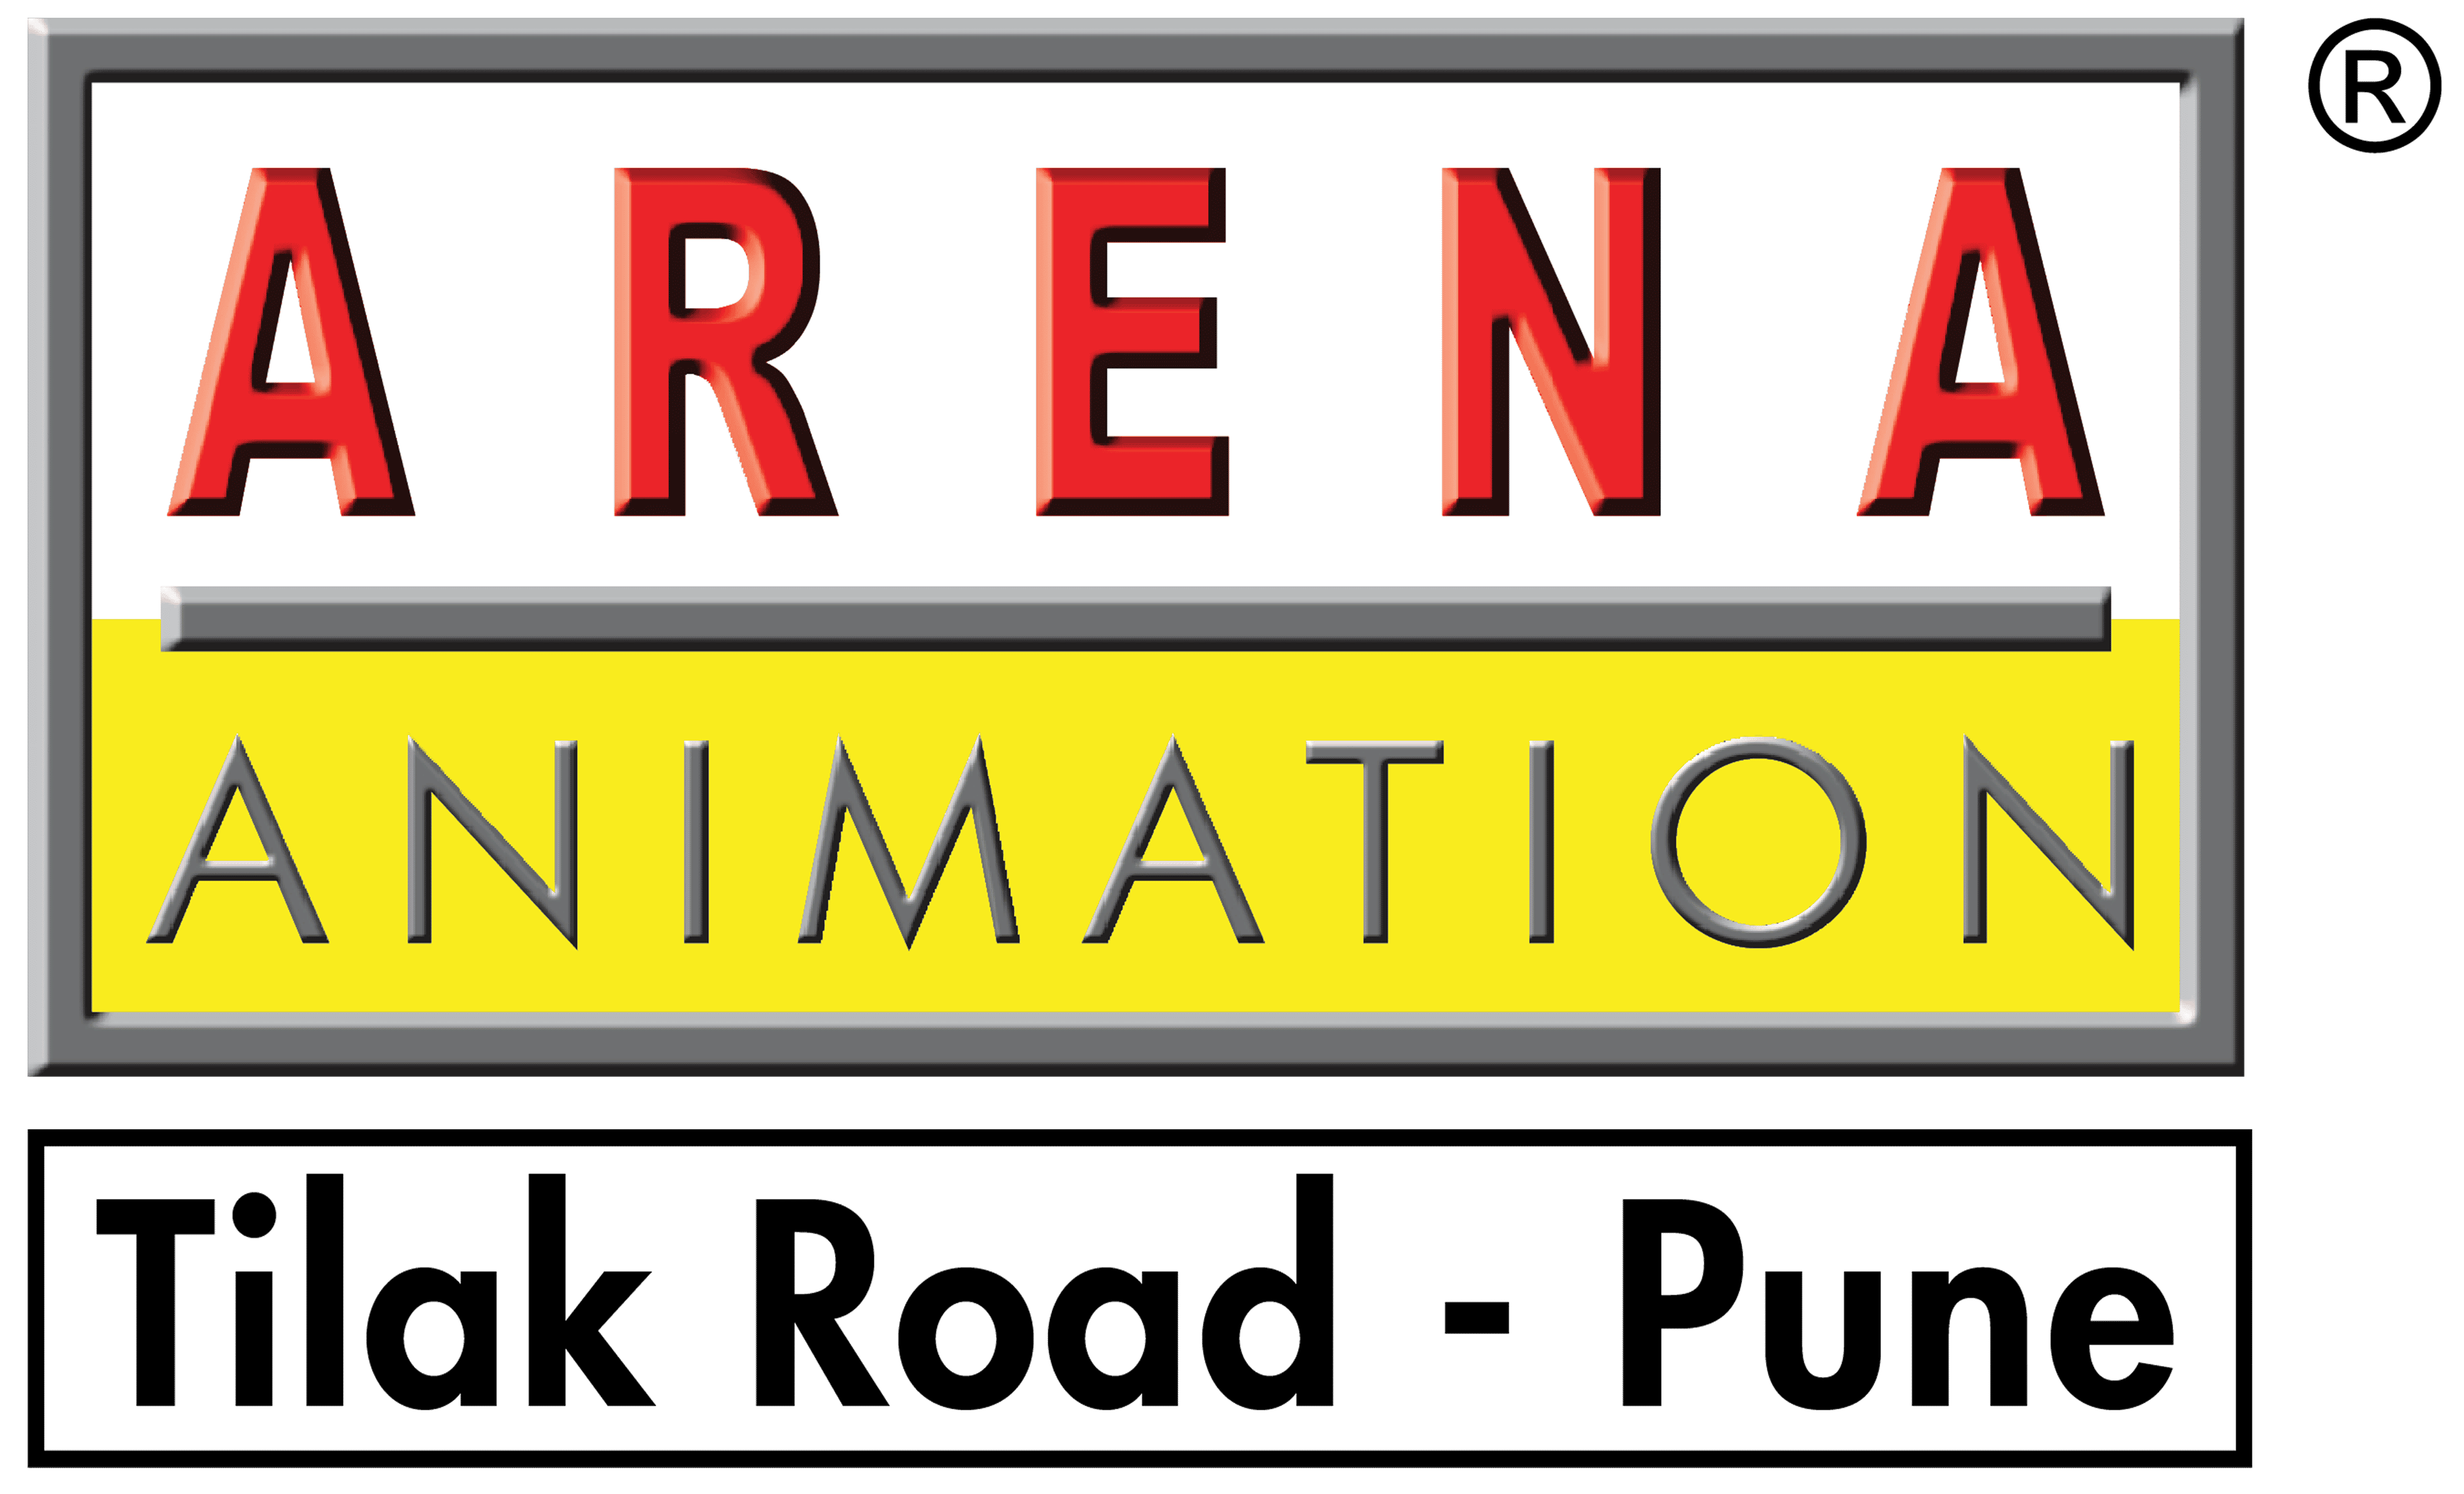 Arena Animation FC Road Pune